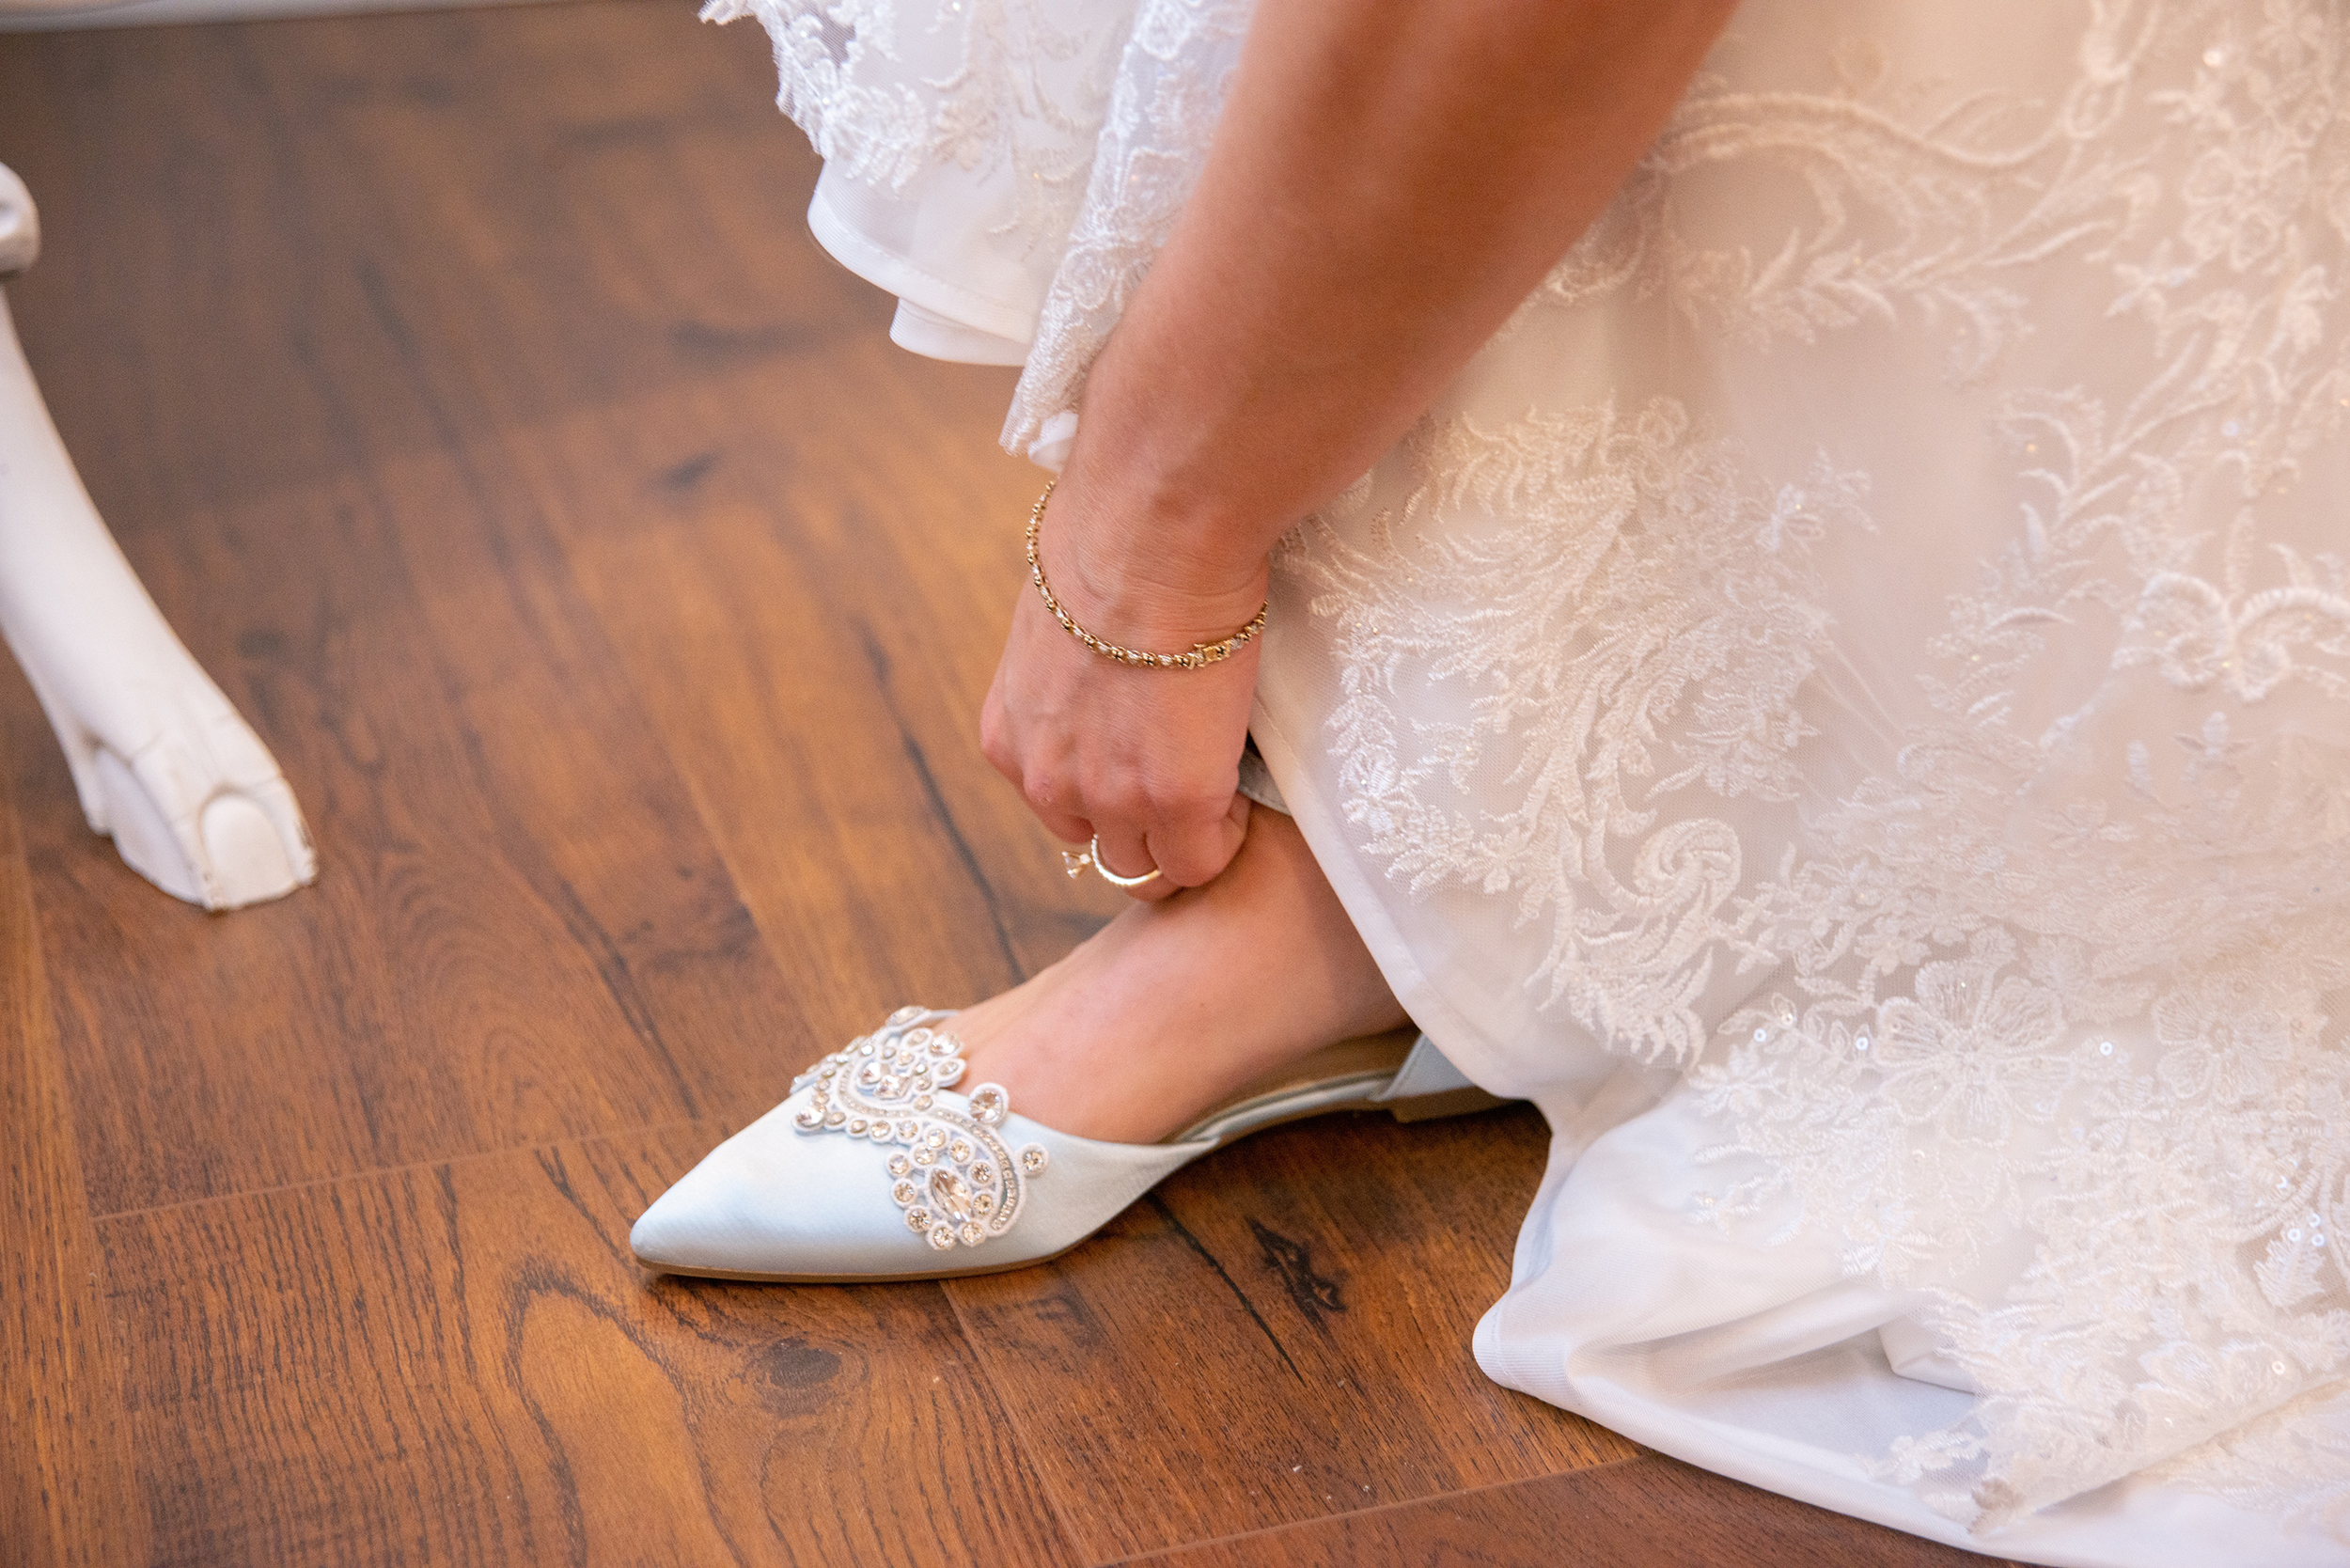 Bride putting blue shoes on while getting ready for her wedding.